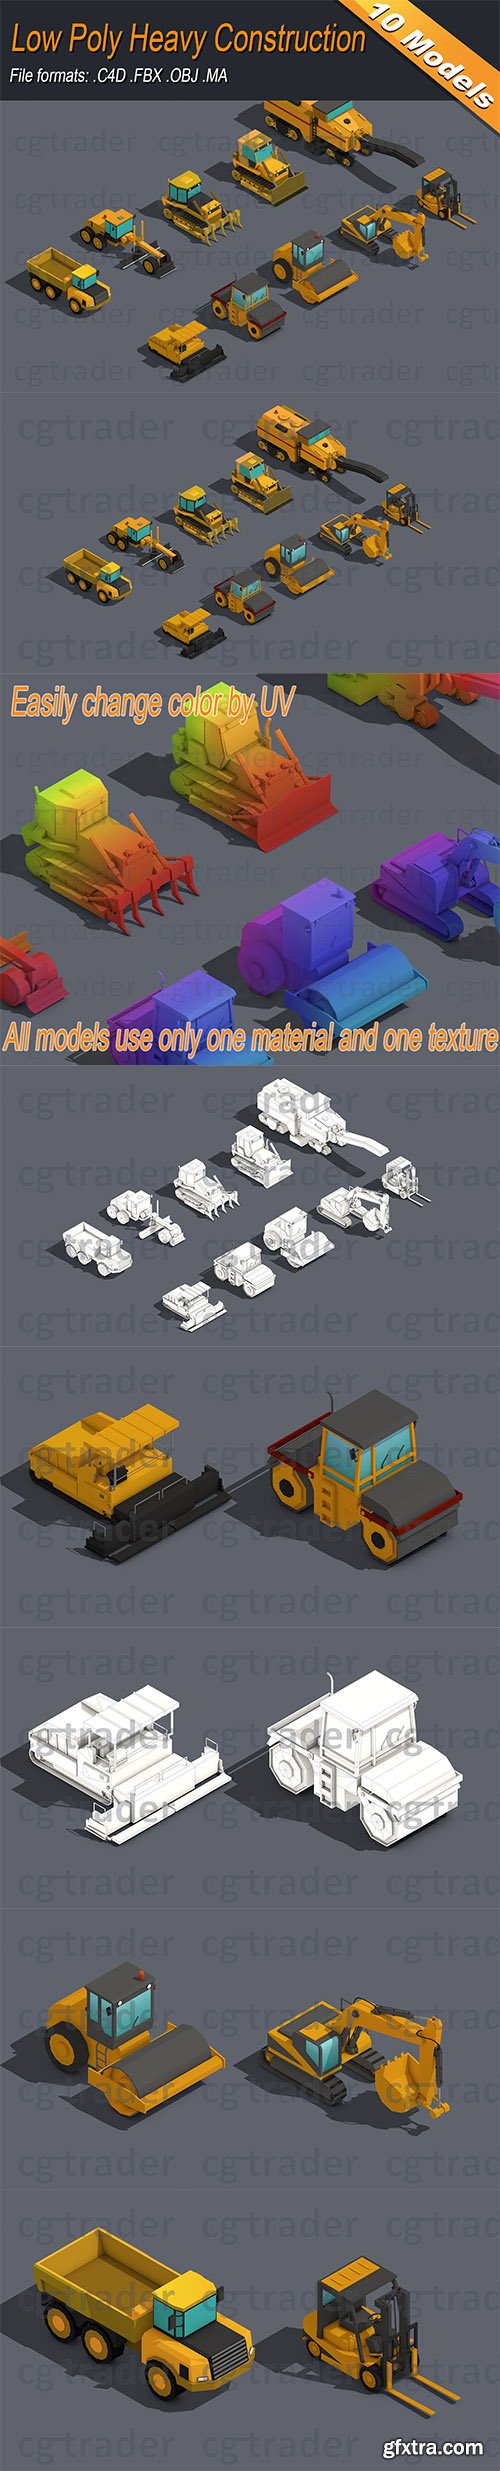 Cgtrader - Low Poly Heavy Construction Machinery Equipment Industrial Low-poly 3D model